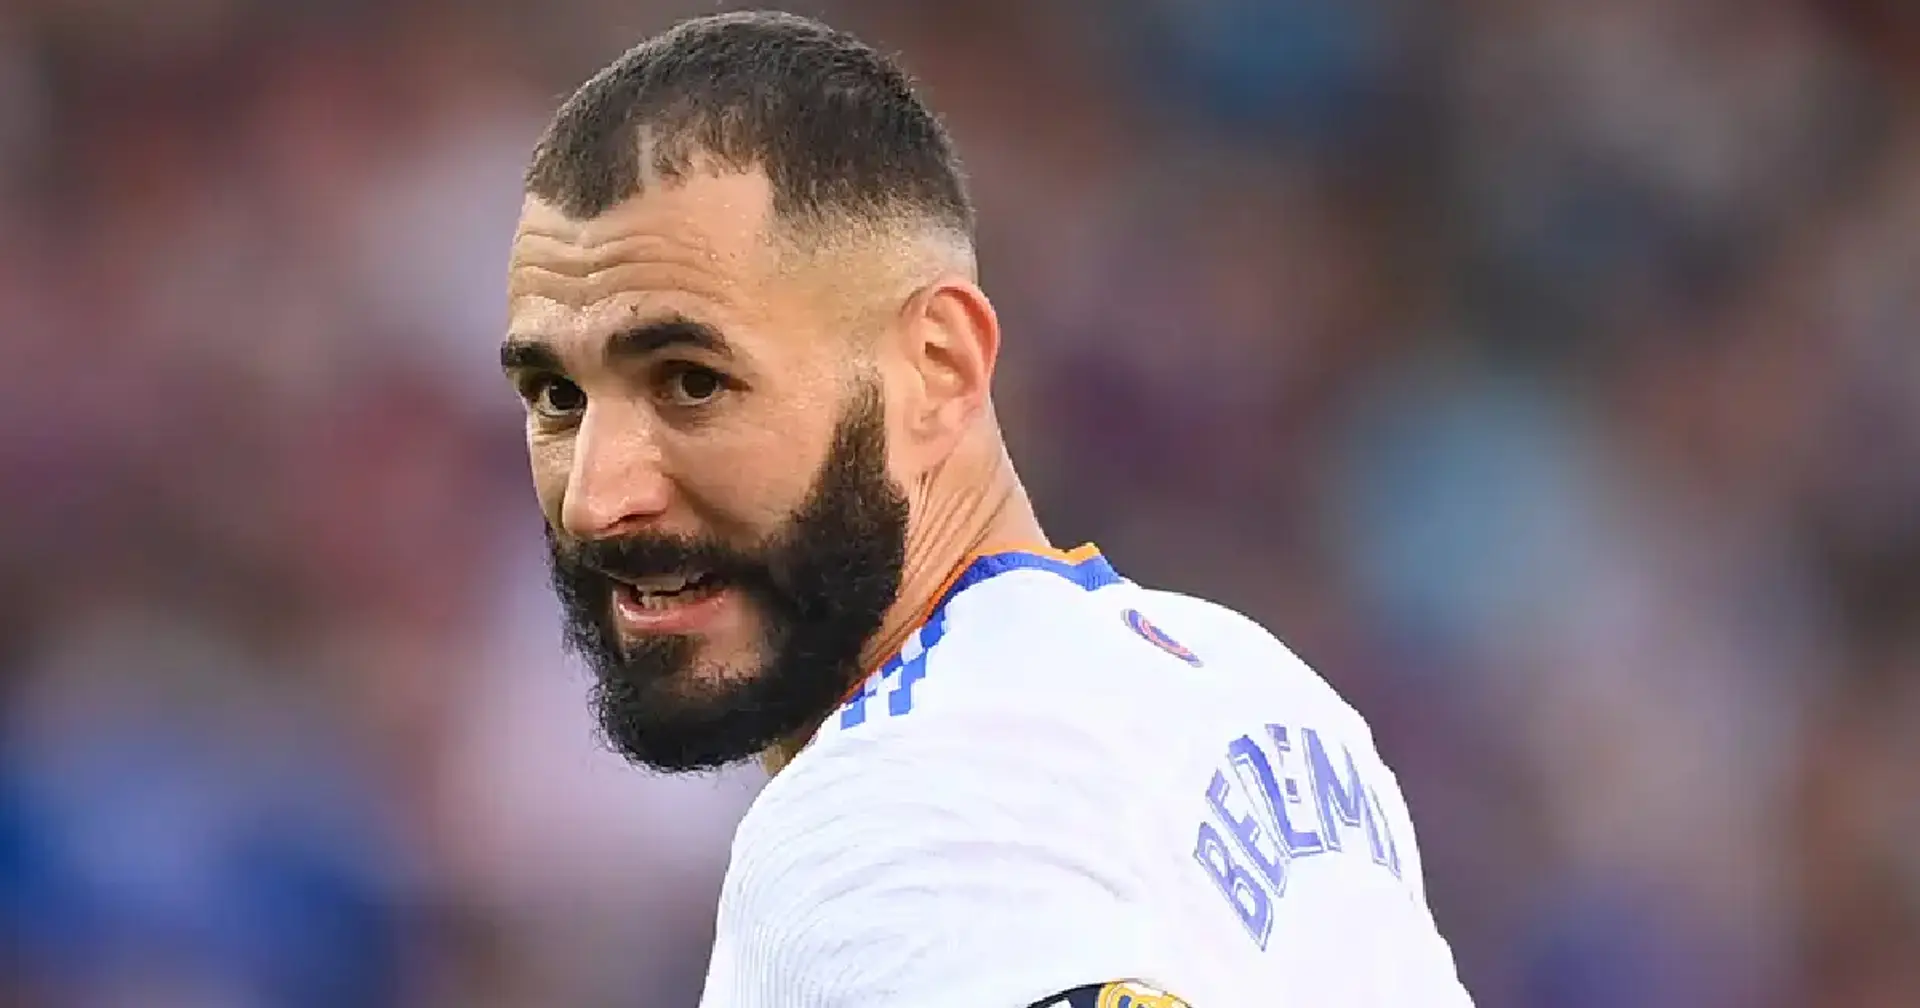 Will Benzema play against Sheriff now he's been handed a prison sentence? You asked, we answered